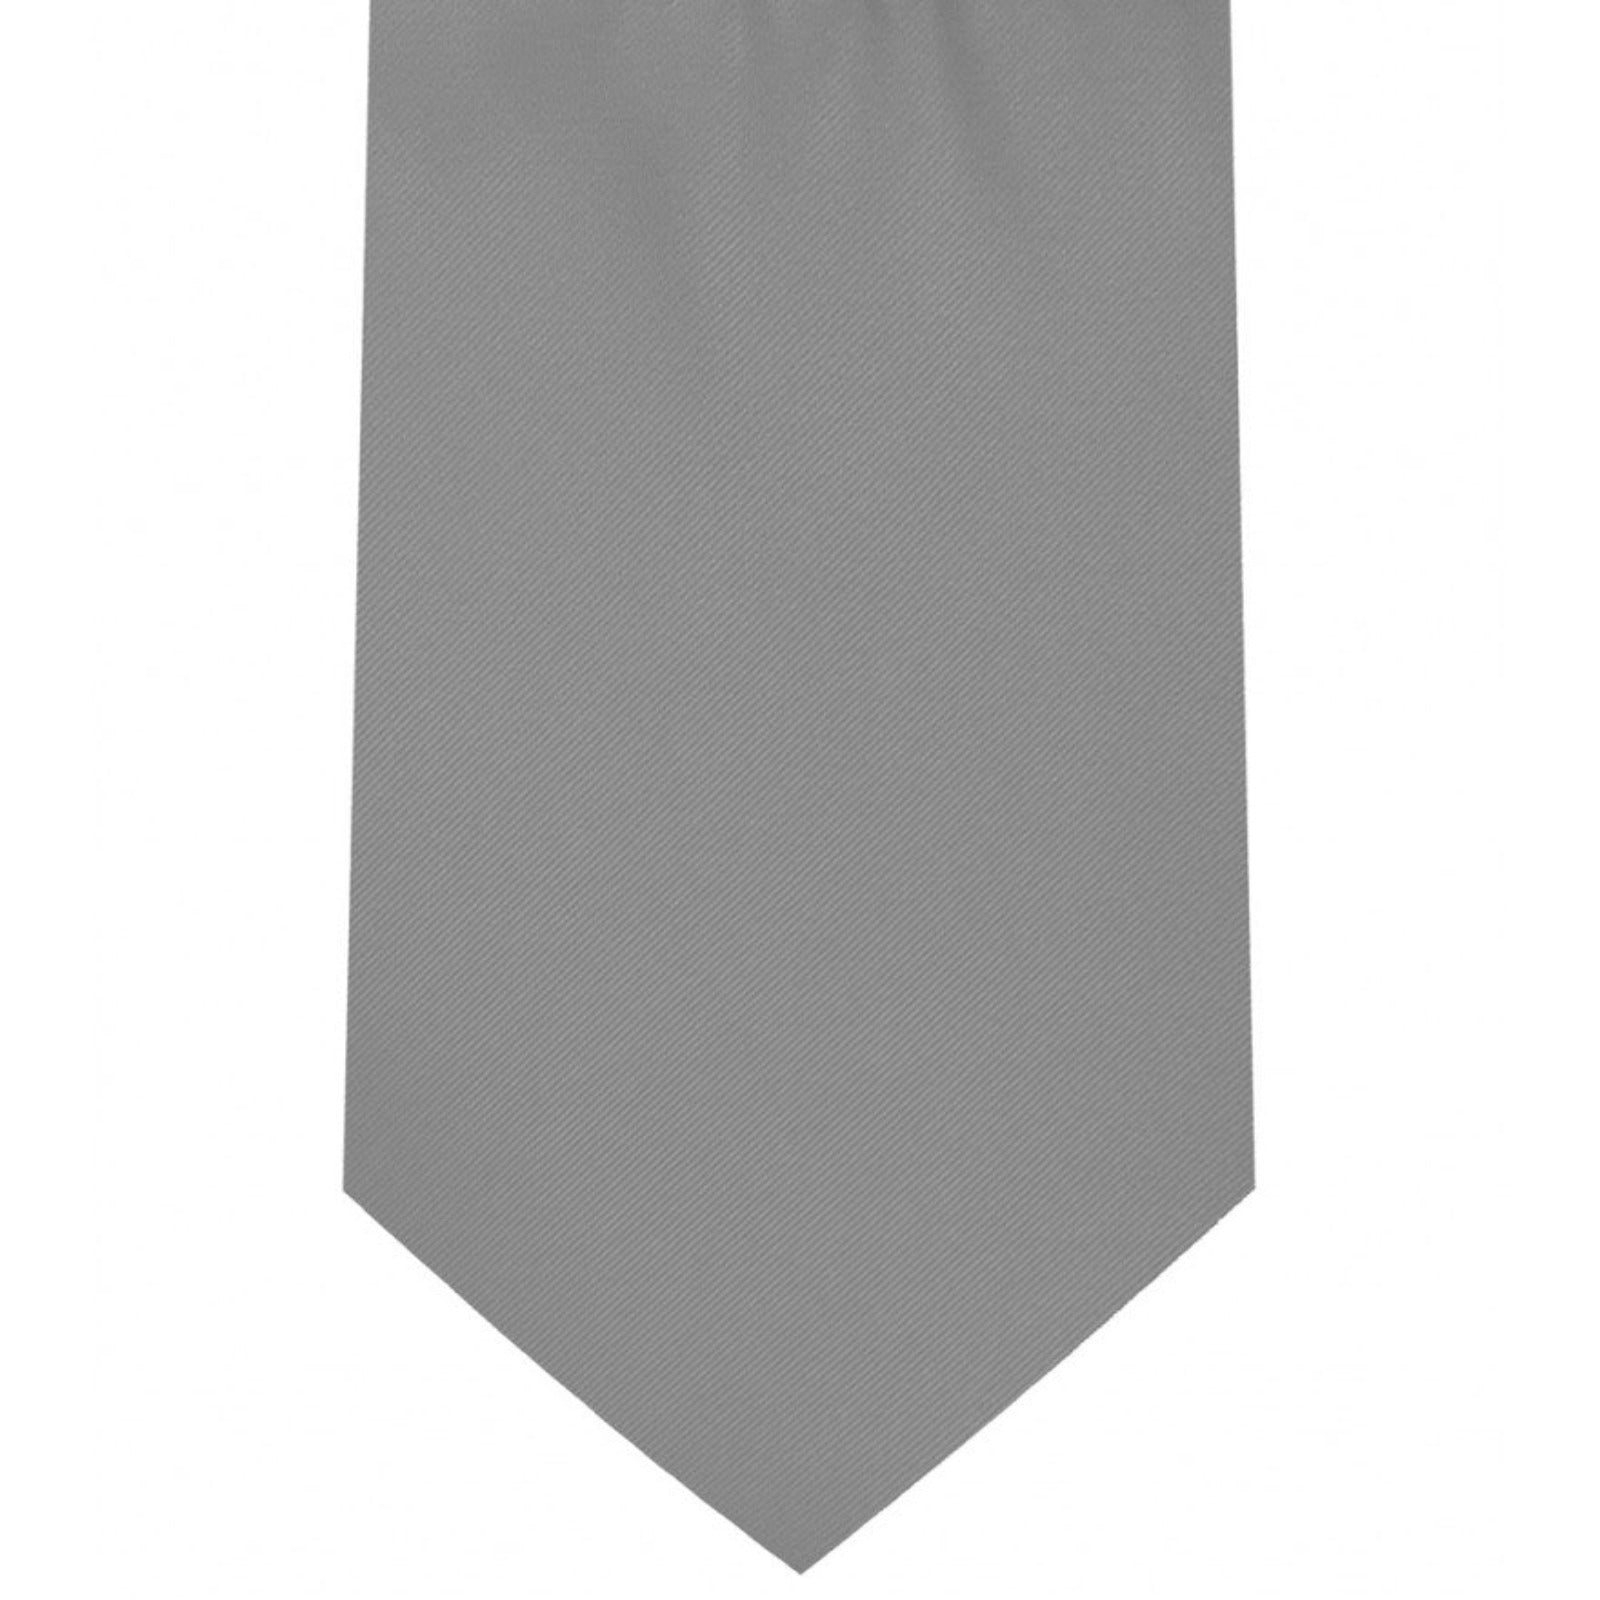 Classic Dark Silver Tie Regular width 3.5 inches With Matching Pocket Square | KCT Menswear